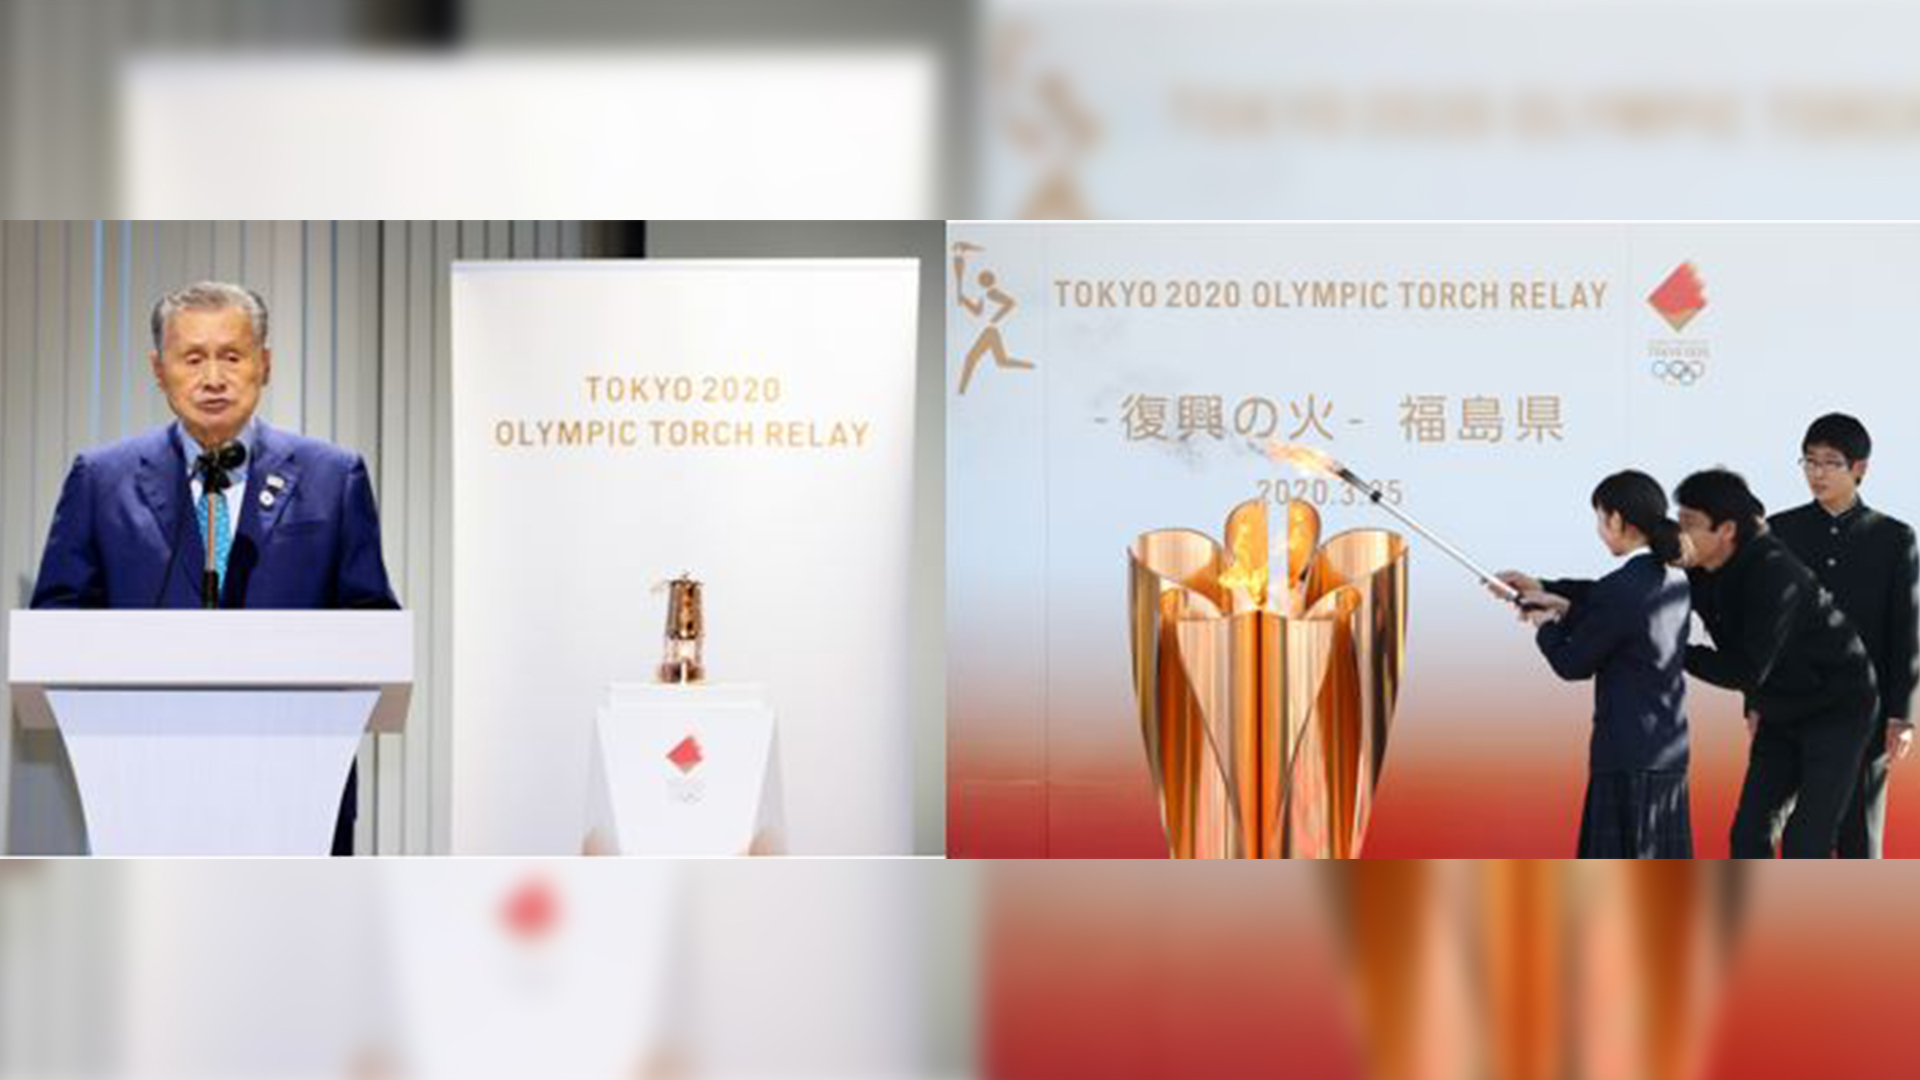 Torch relay of Tokyo Olympics to start on March 25, 2021 in Fukushima